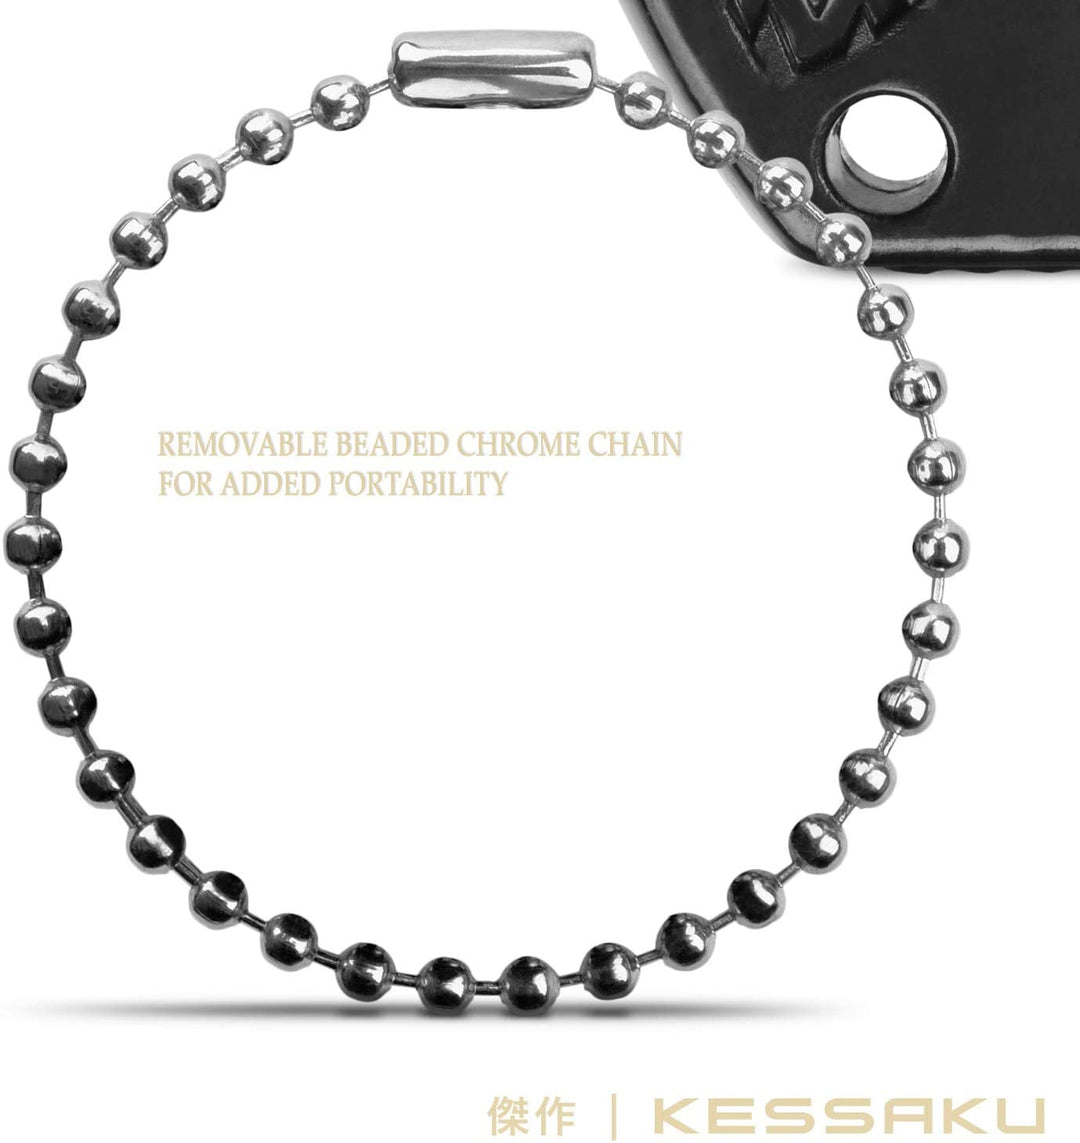 Removable beaded chrome chain for added portability